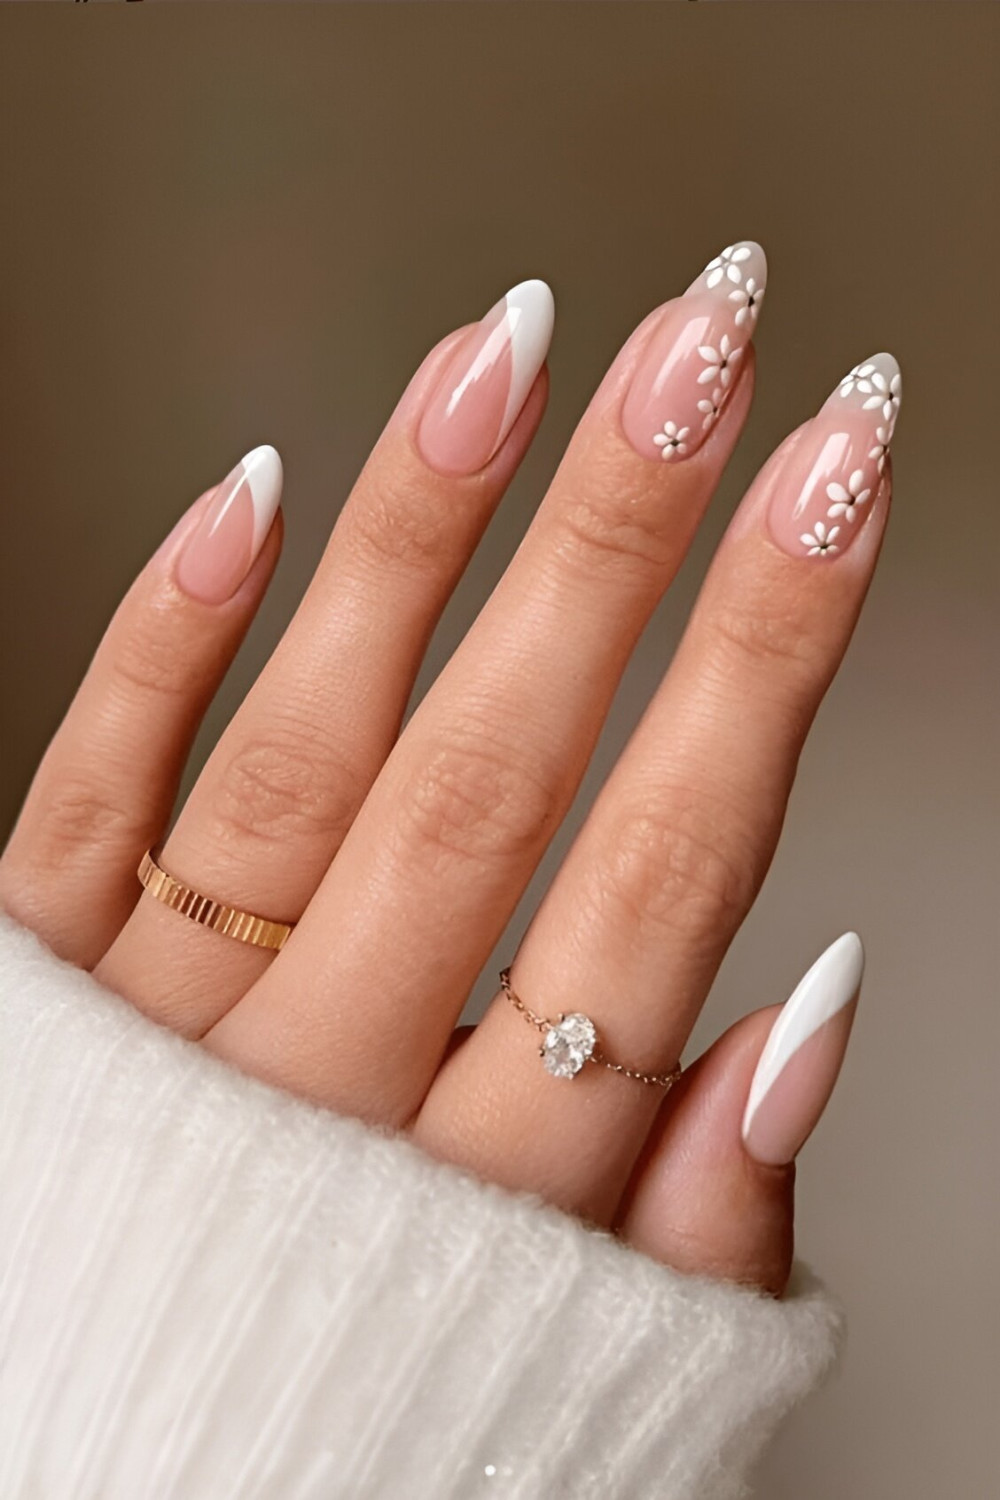 40 Stunning Wedding Nail Designs For Your Dream Wedding - 249